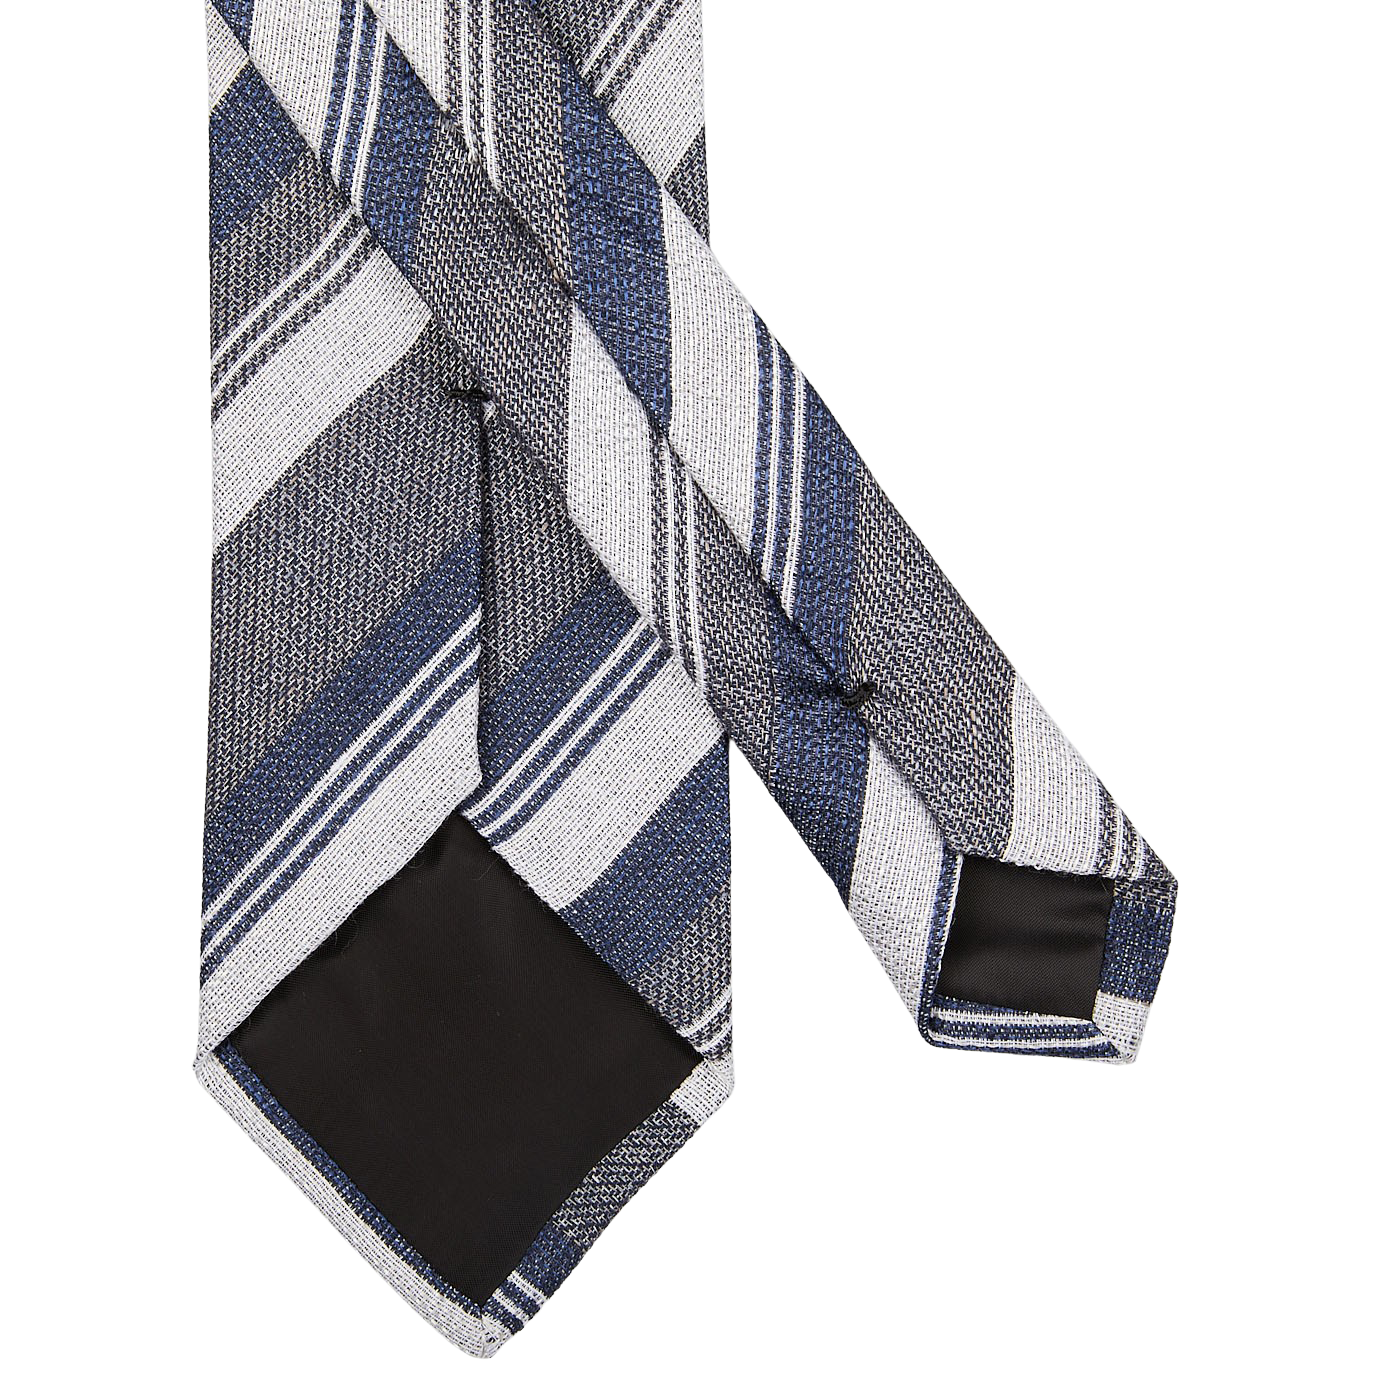 A blue and white striped tie on a white background. Made with pure silk fabric, this classic accessory from Amanda Christensen, the "Blue Grey Striped Silk Lined Tie" by Amanda Christensen, offers a refined touch to any outfit.